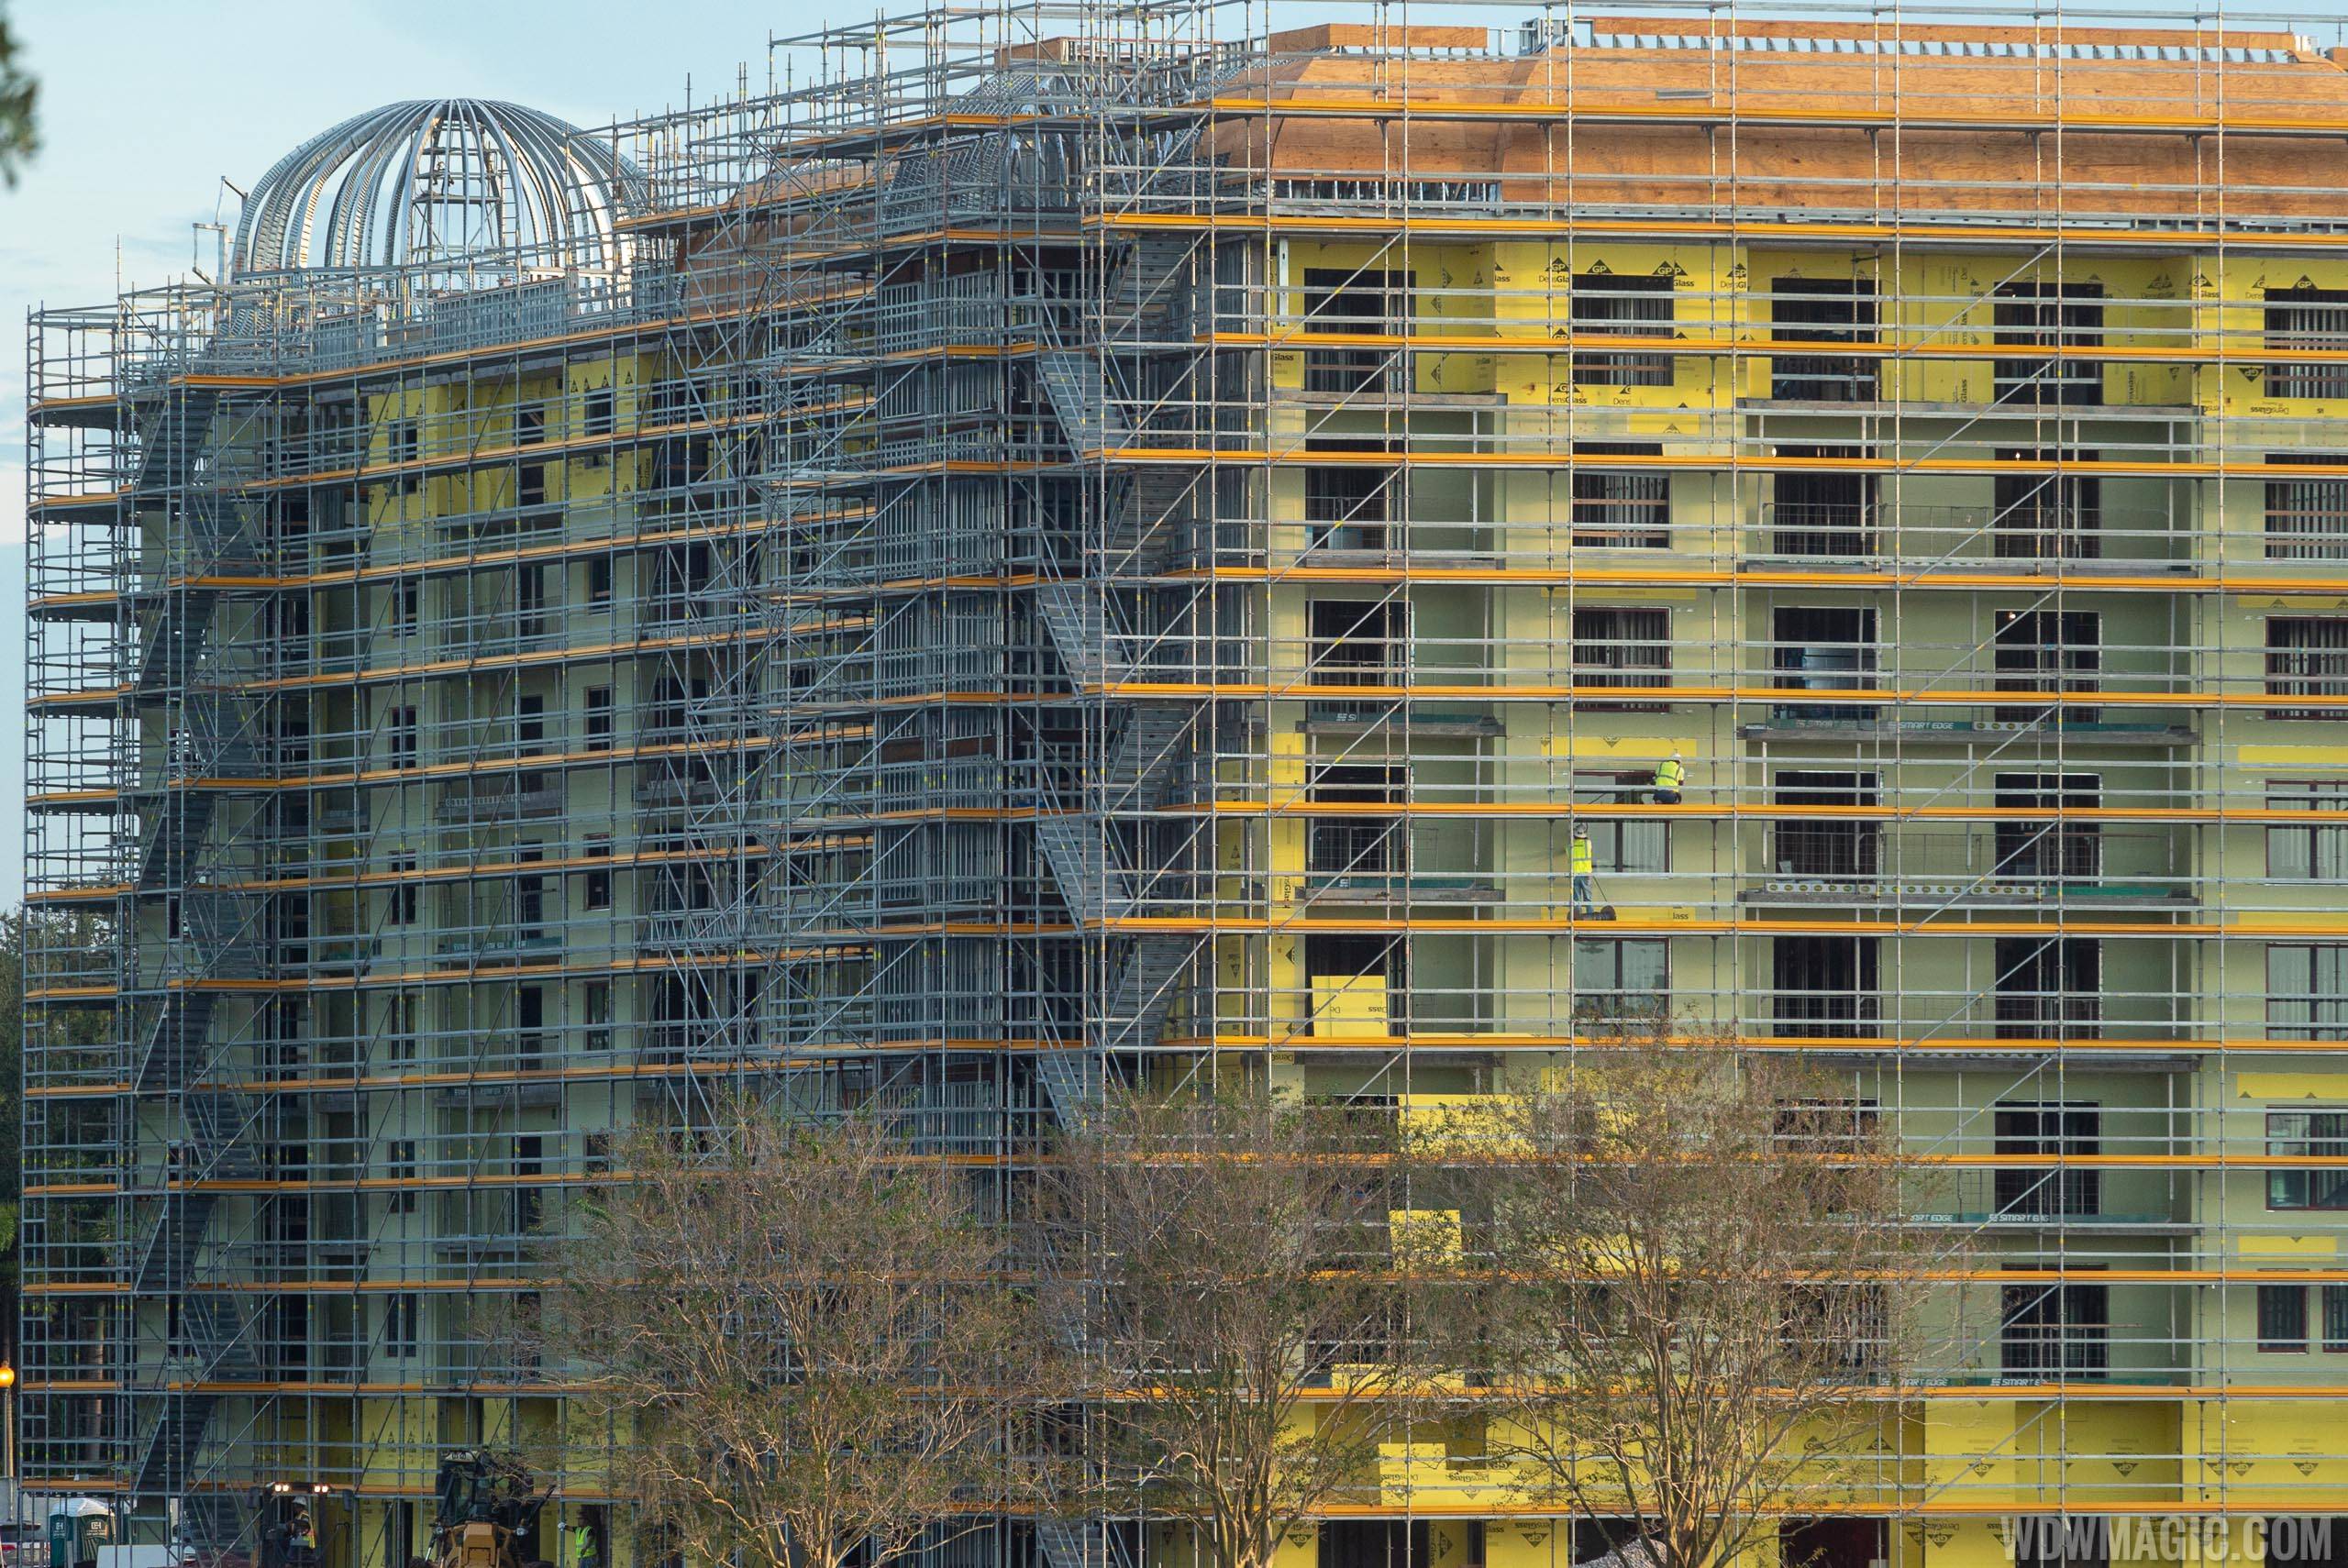 Disney Riviera construction from the ground - October 2018